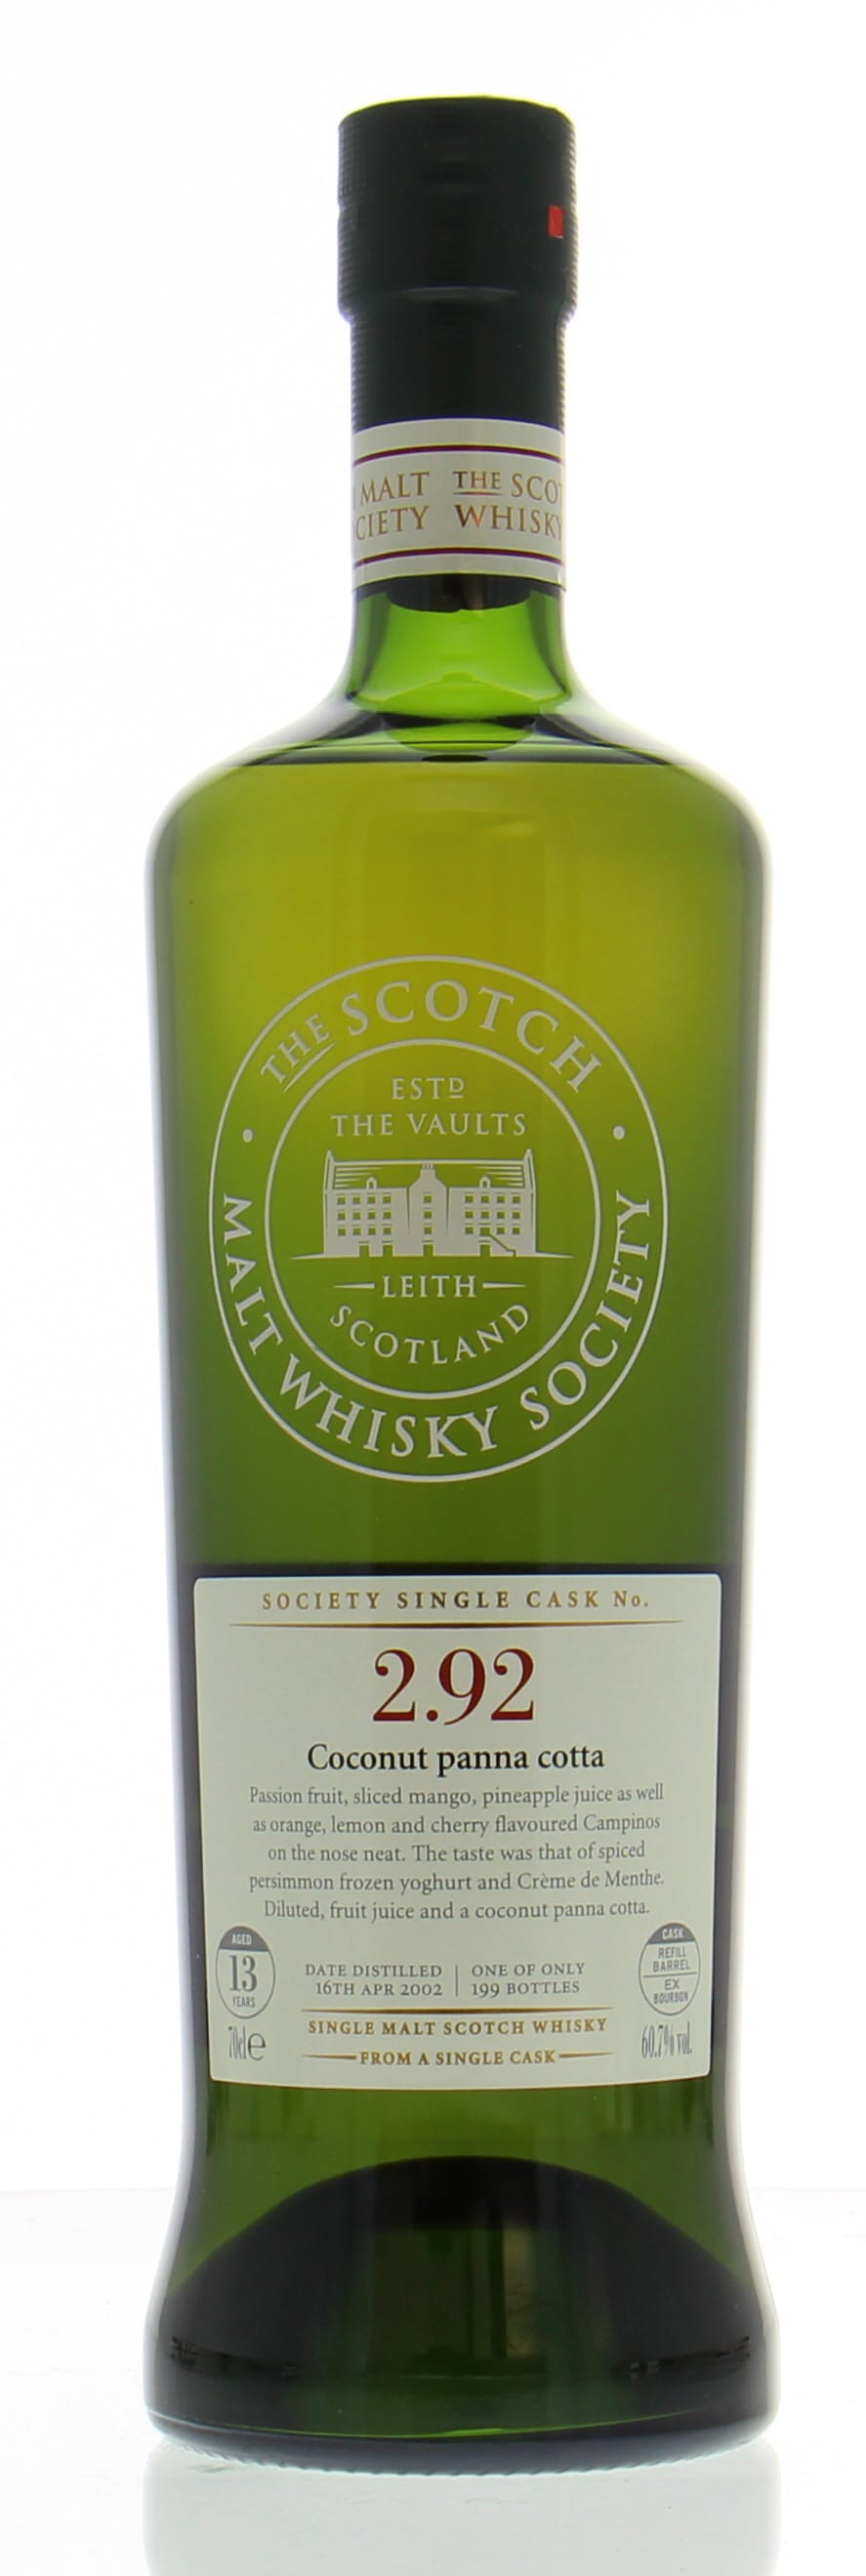 Glenlivet - 13 Years Old SMWS 2.92 Coconut panna cotta 1 Of 199 Bottles 60.7% 2002 Perfect